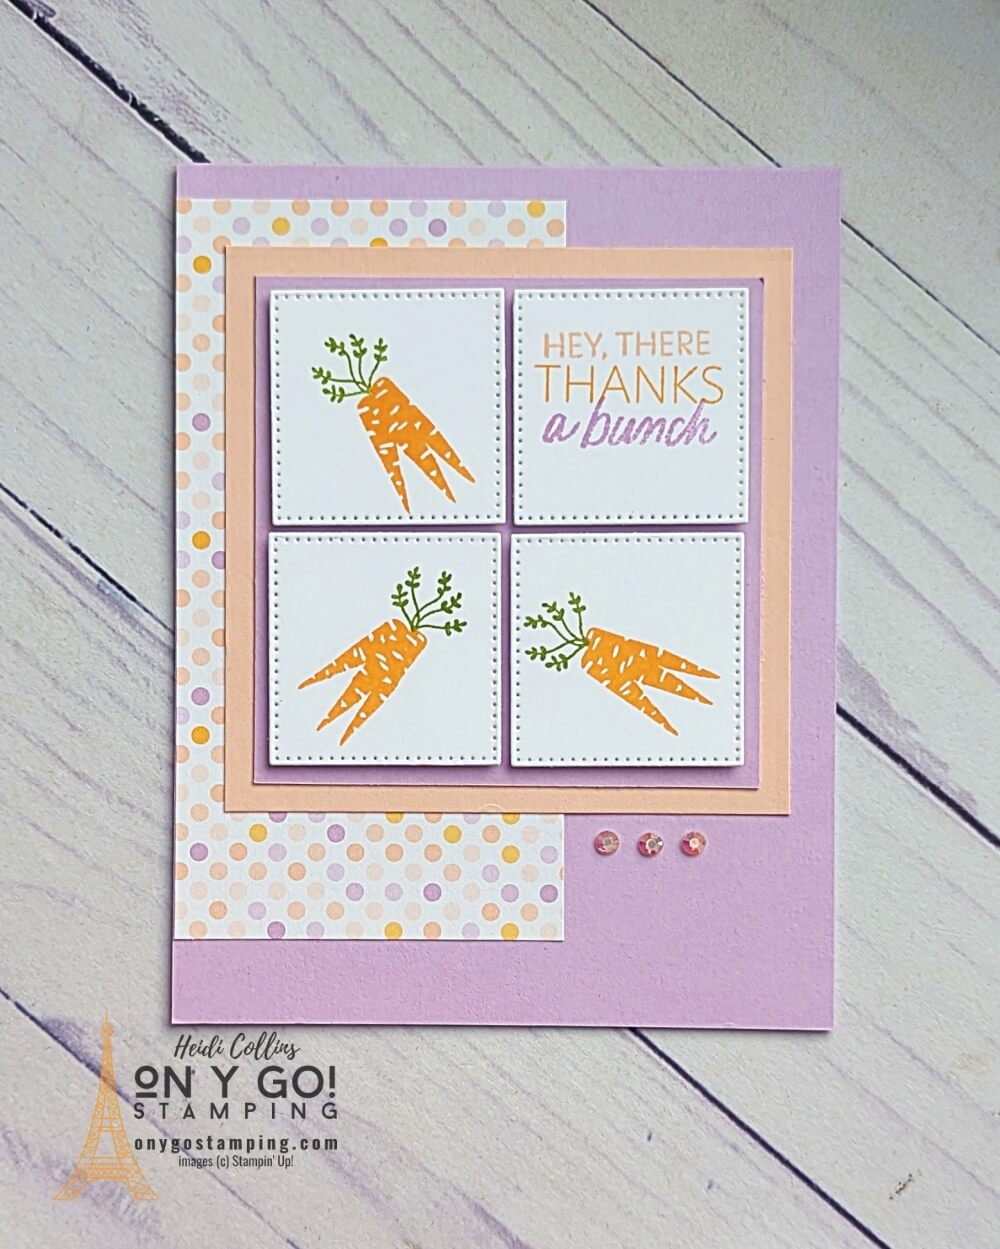 Sale-A-Bration 2023 is almost here! Get the Thanks a Bunch stamp set for FREE from Stampin' Up!® It's great for making handmade thank you cards like this one.